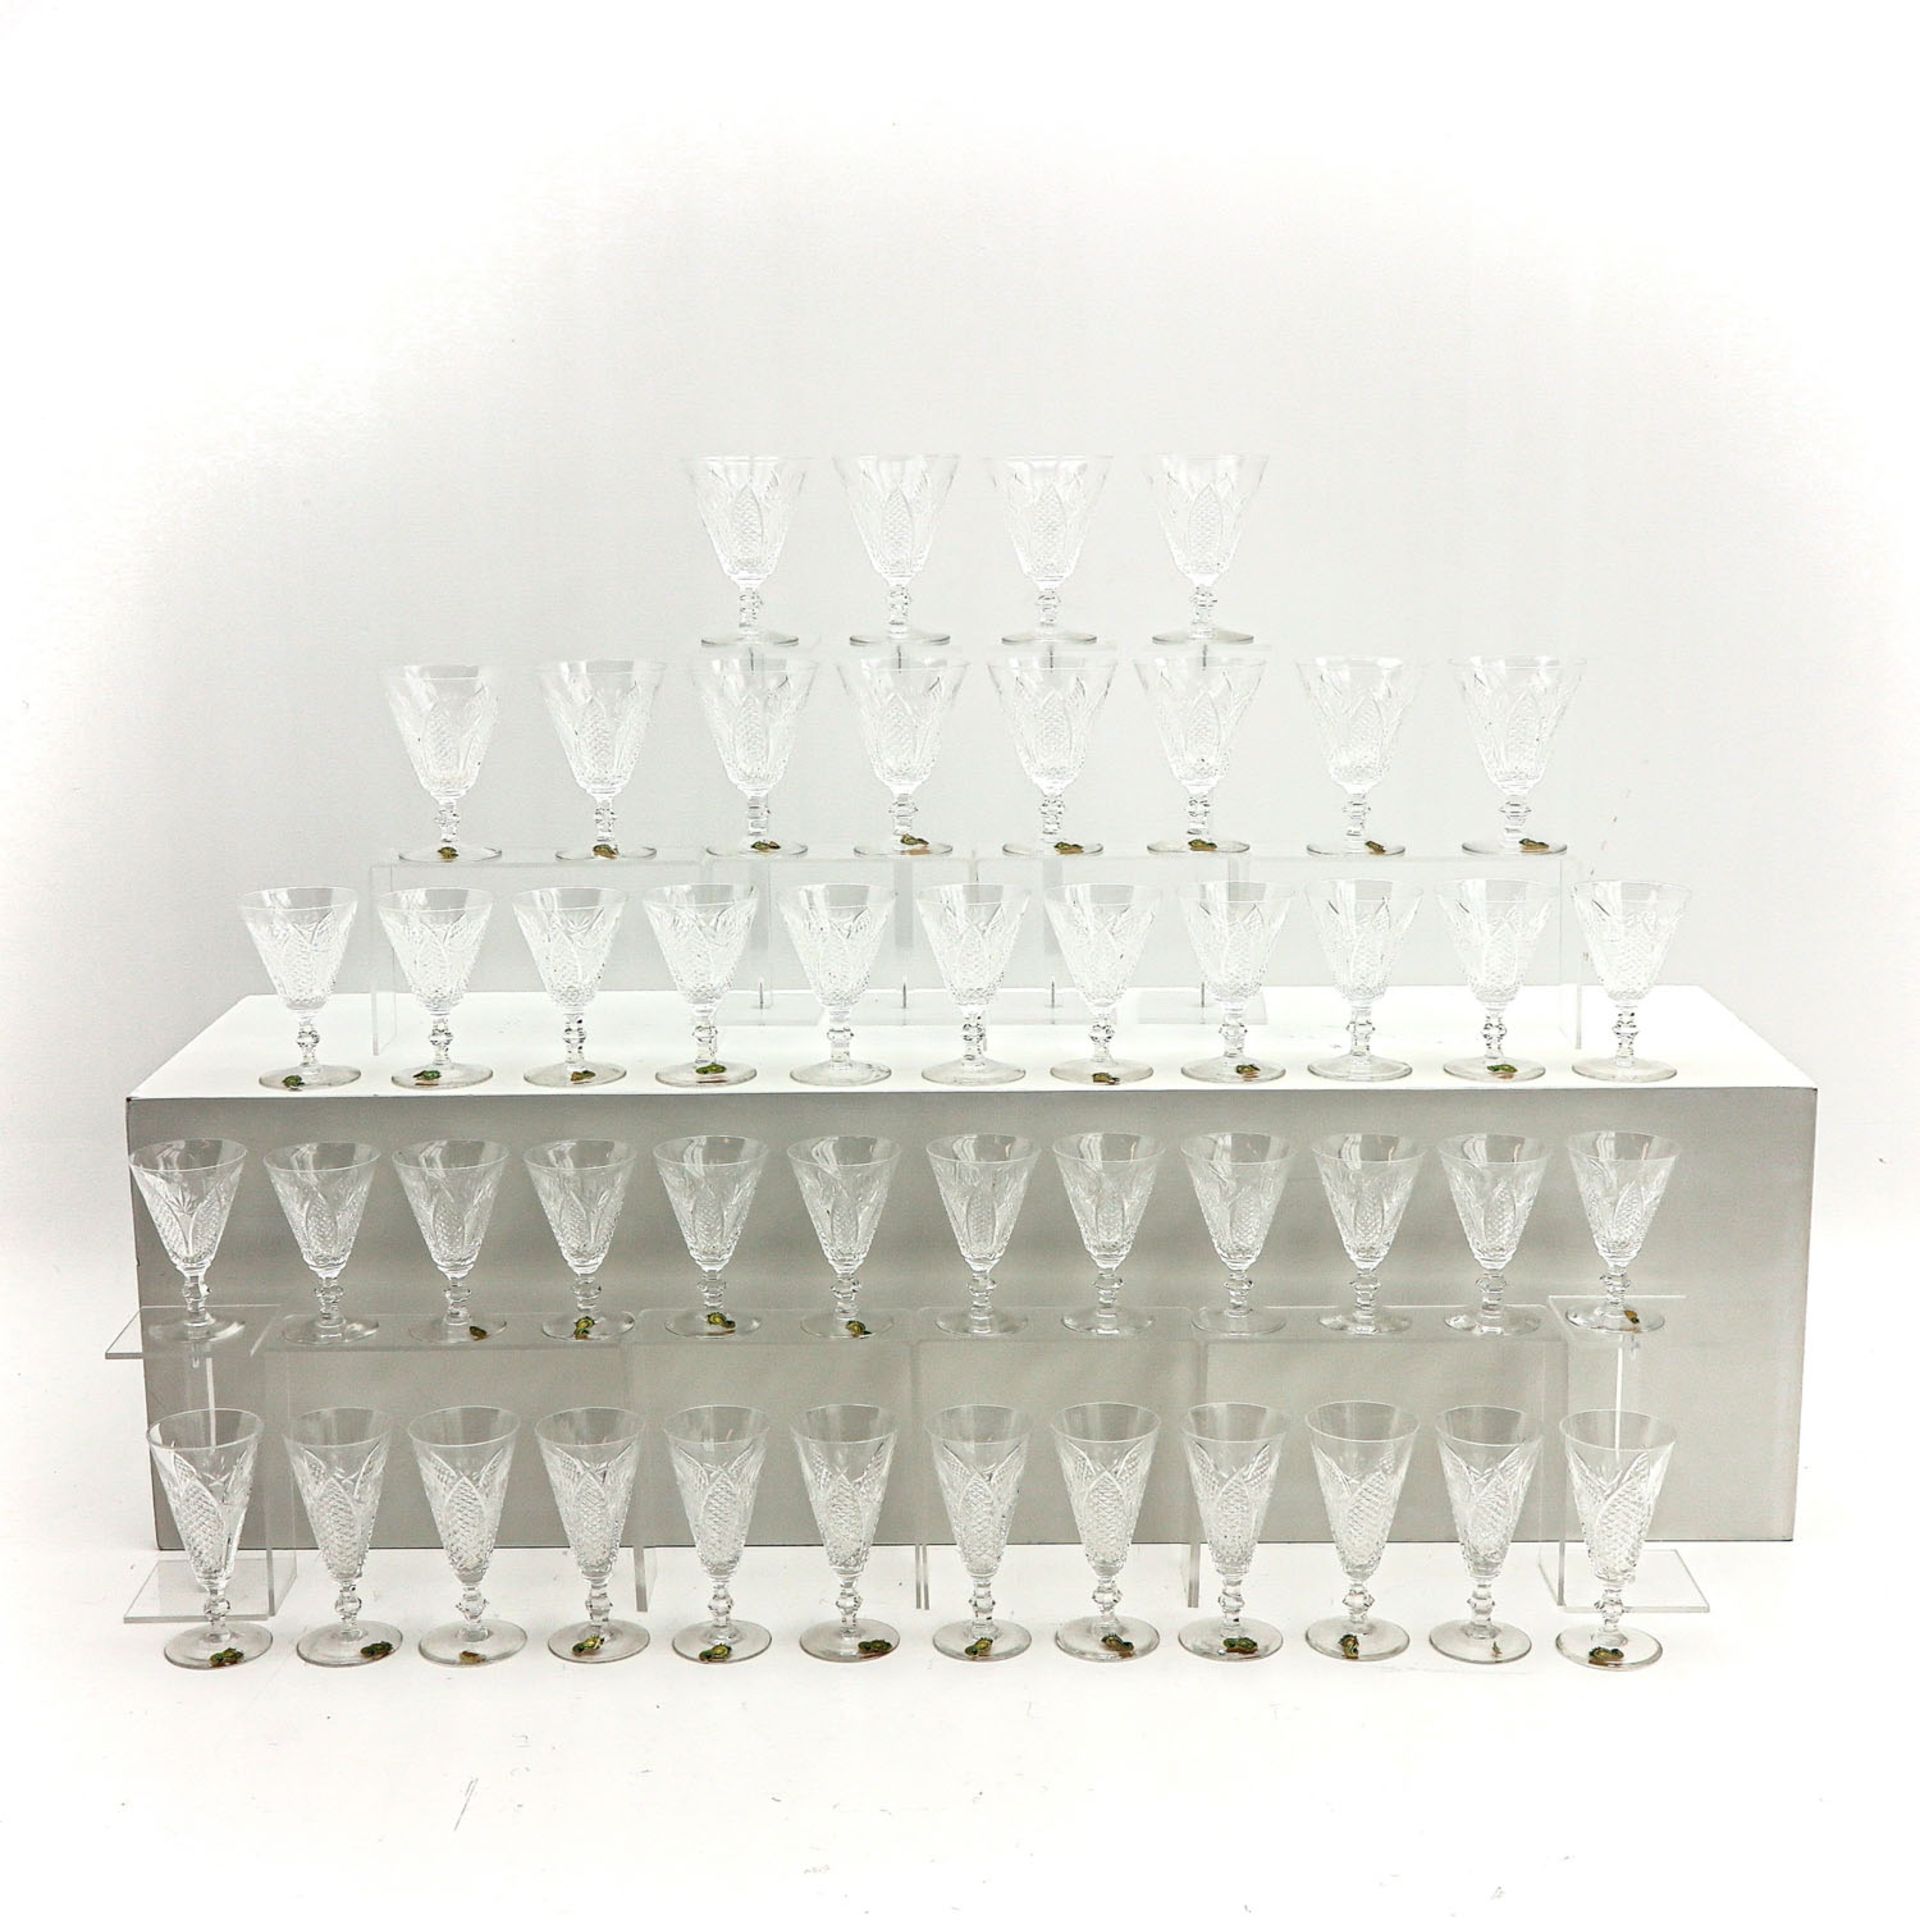 A Collection of 47 Waterford Crystal Glasses